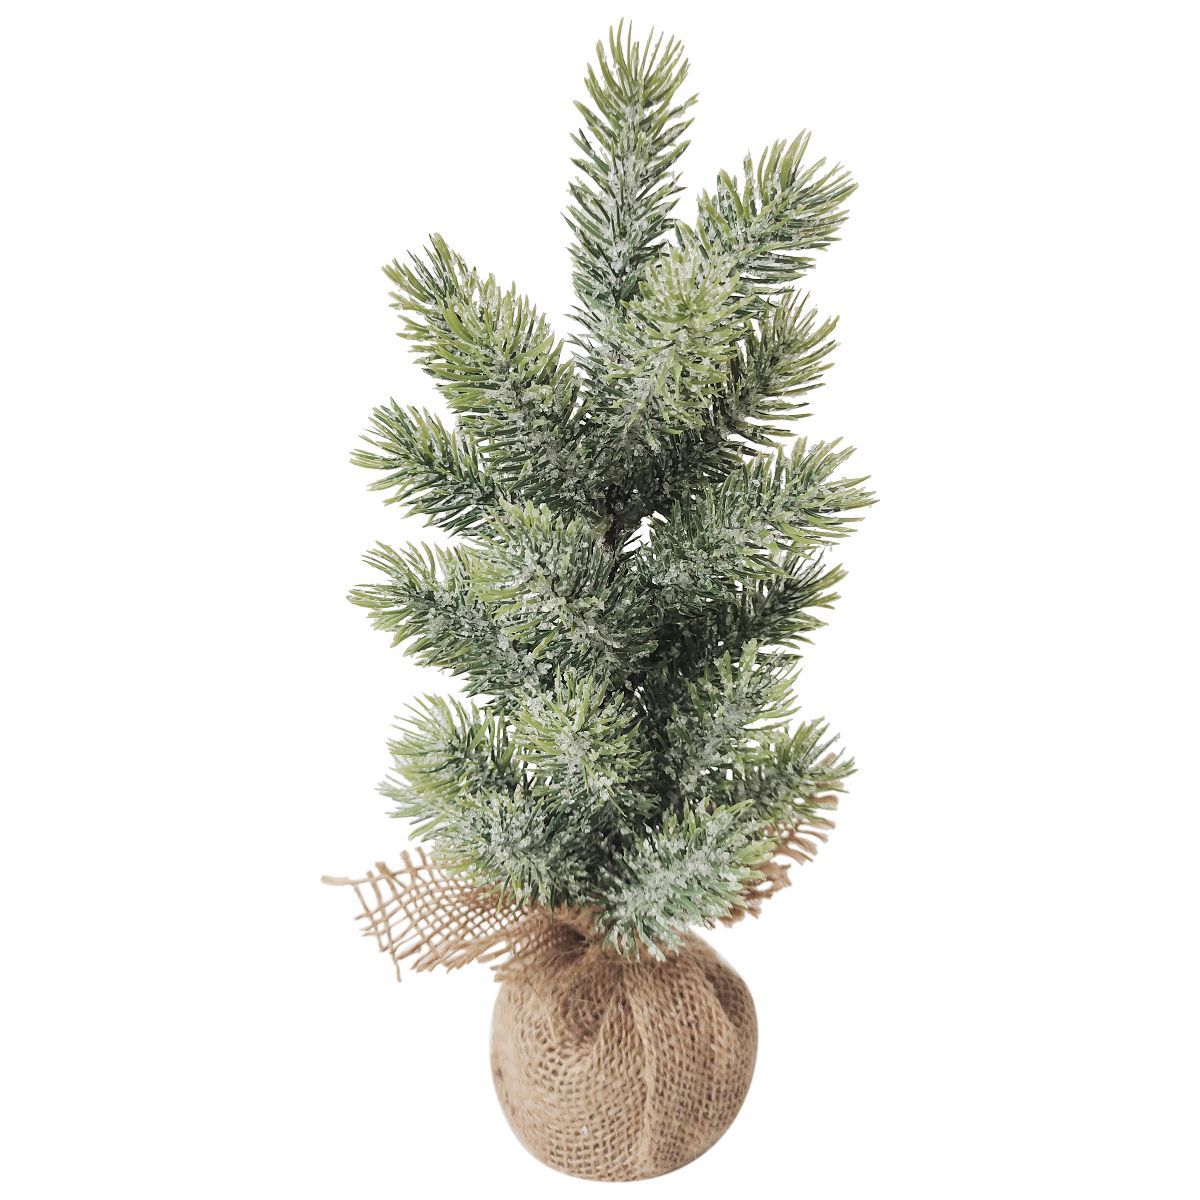 Northlight 11.75" Frosted Icy Pine Tree in Burlap Base Christmas Decoration | Target